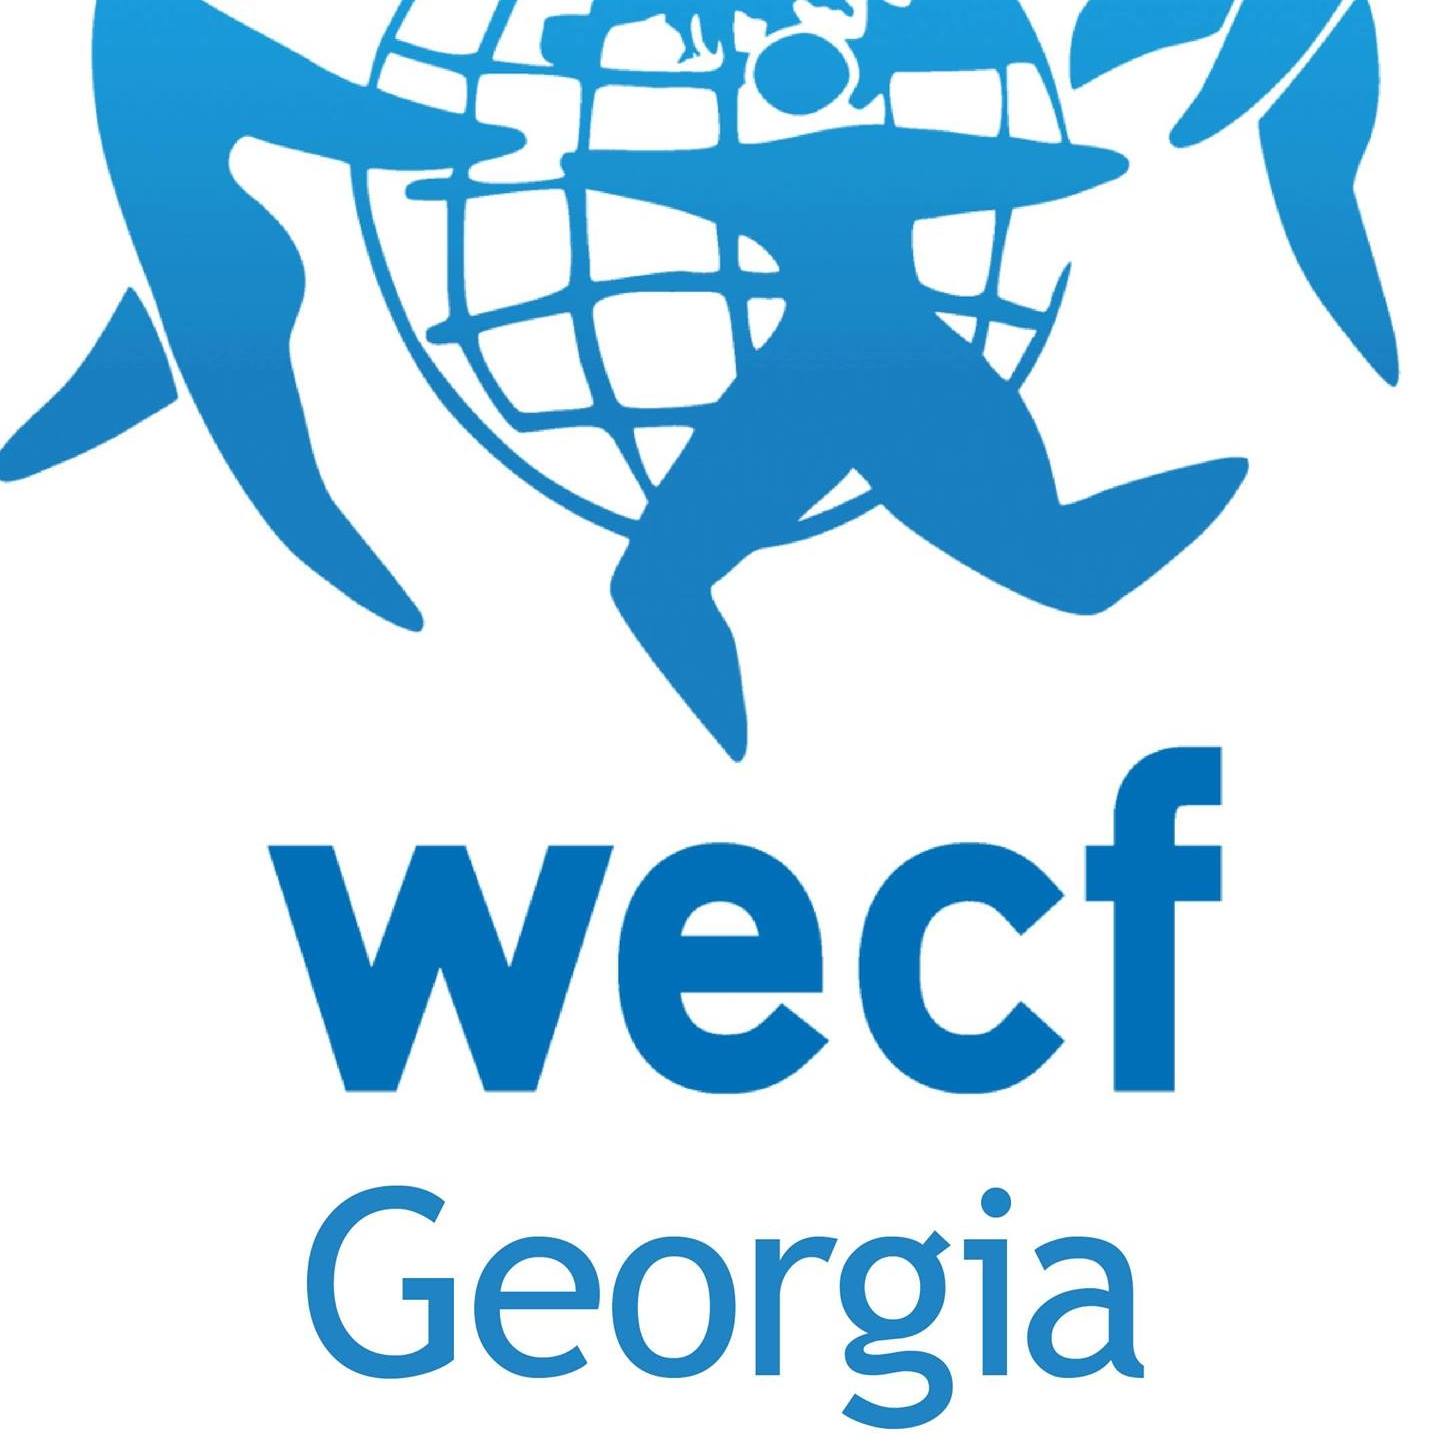 Women Engage for a common Future –Georgia (WECF) 